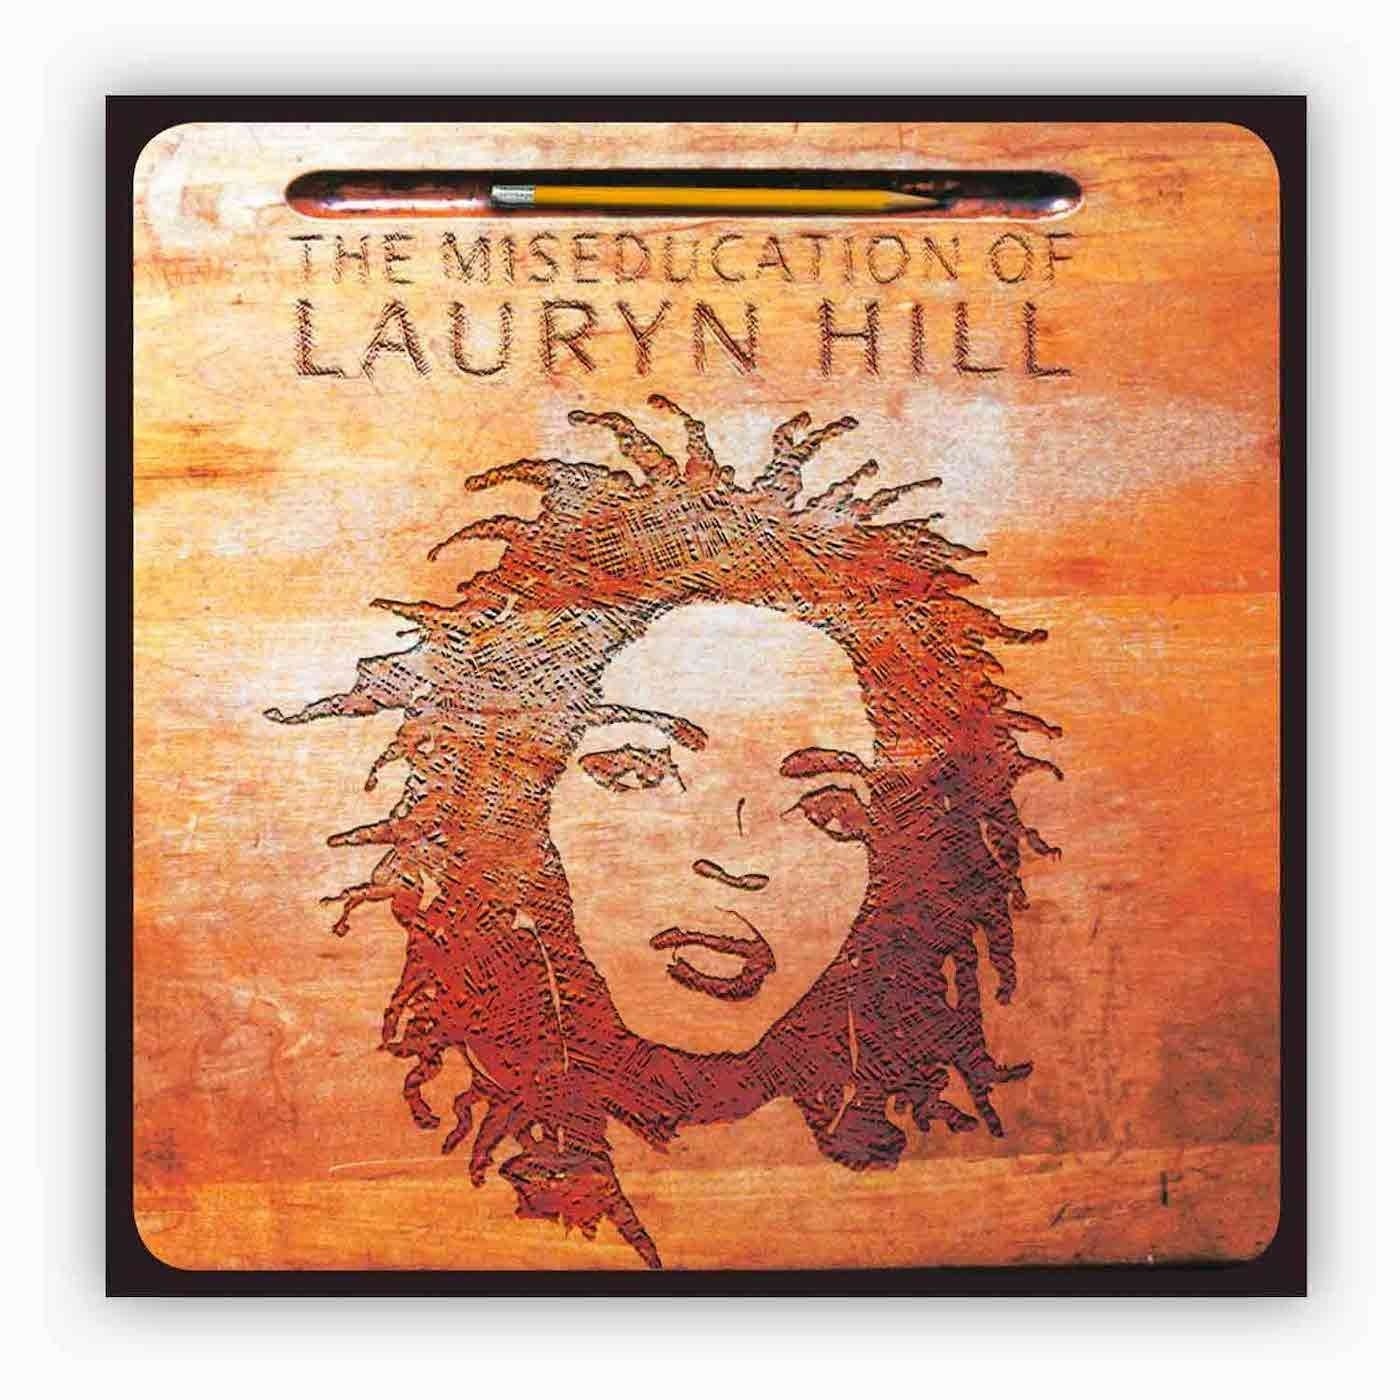 Lauryn Hill: The Miseducation of Lauryn Hill (1998). Beyond Our Wildest Dreams